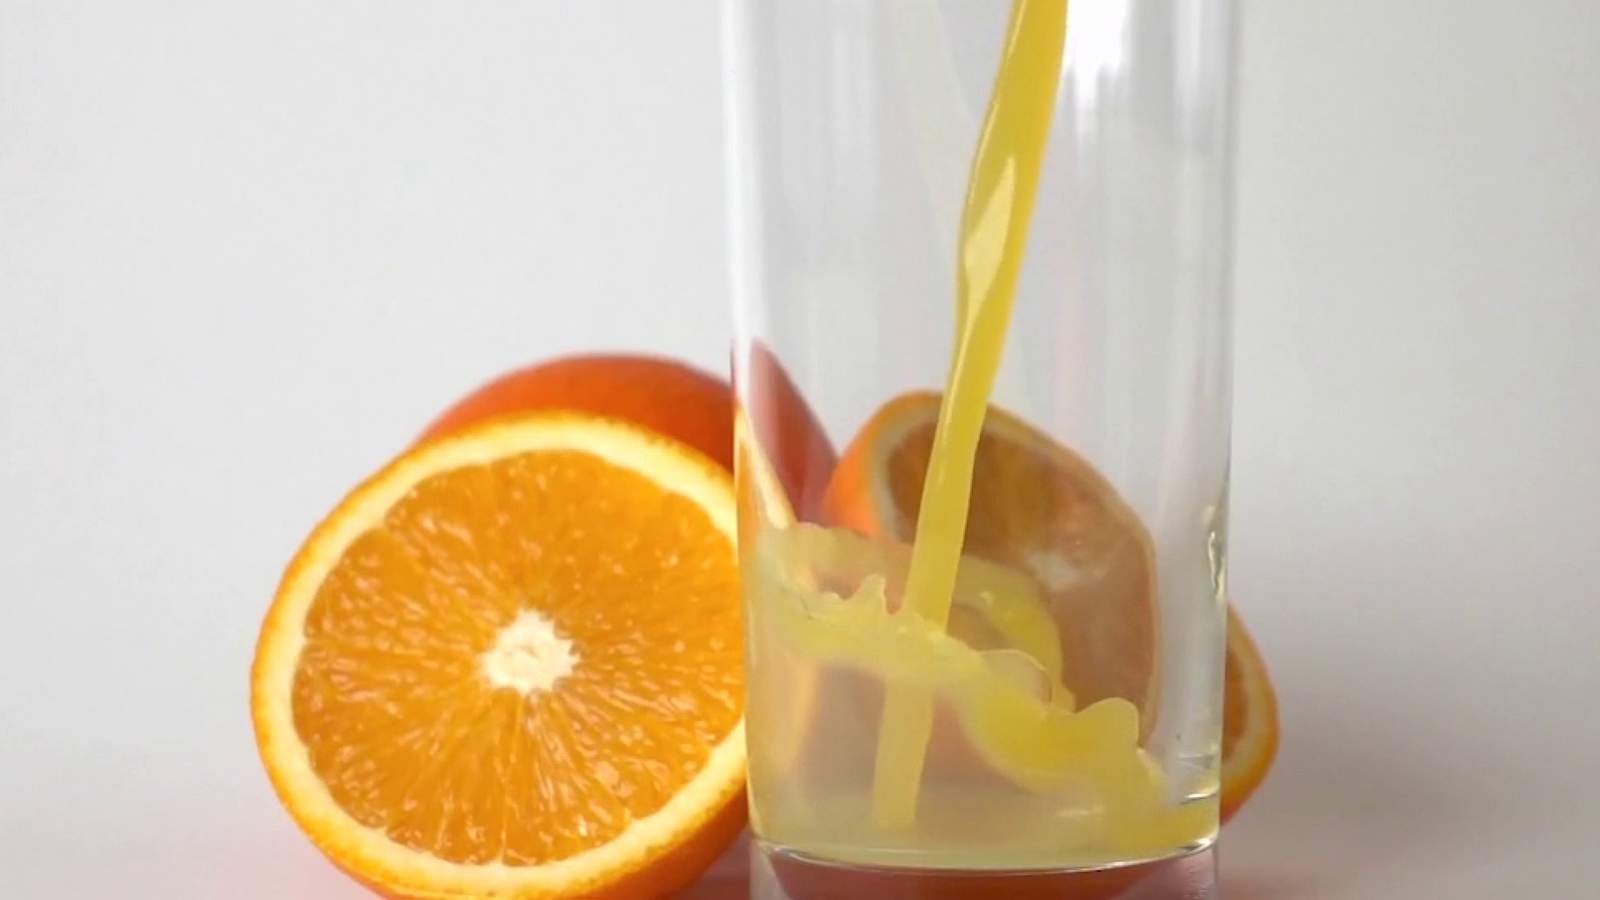 If you’re sick, these drinks may help you feel better